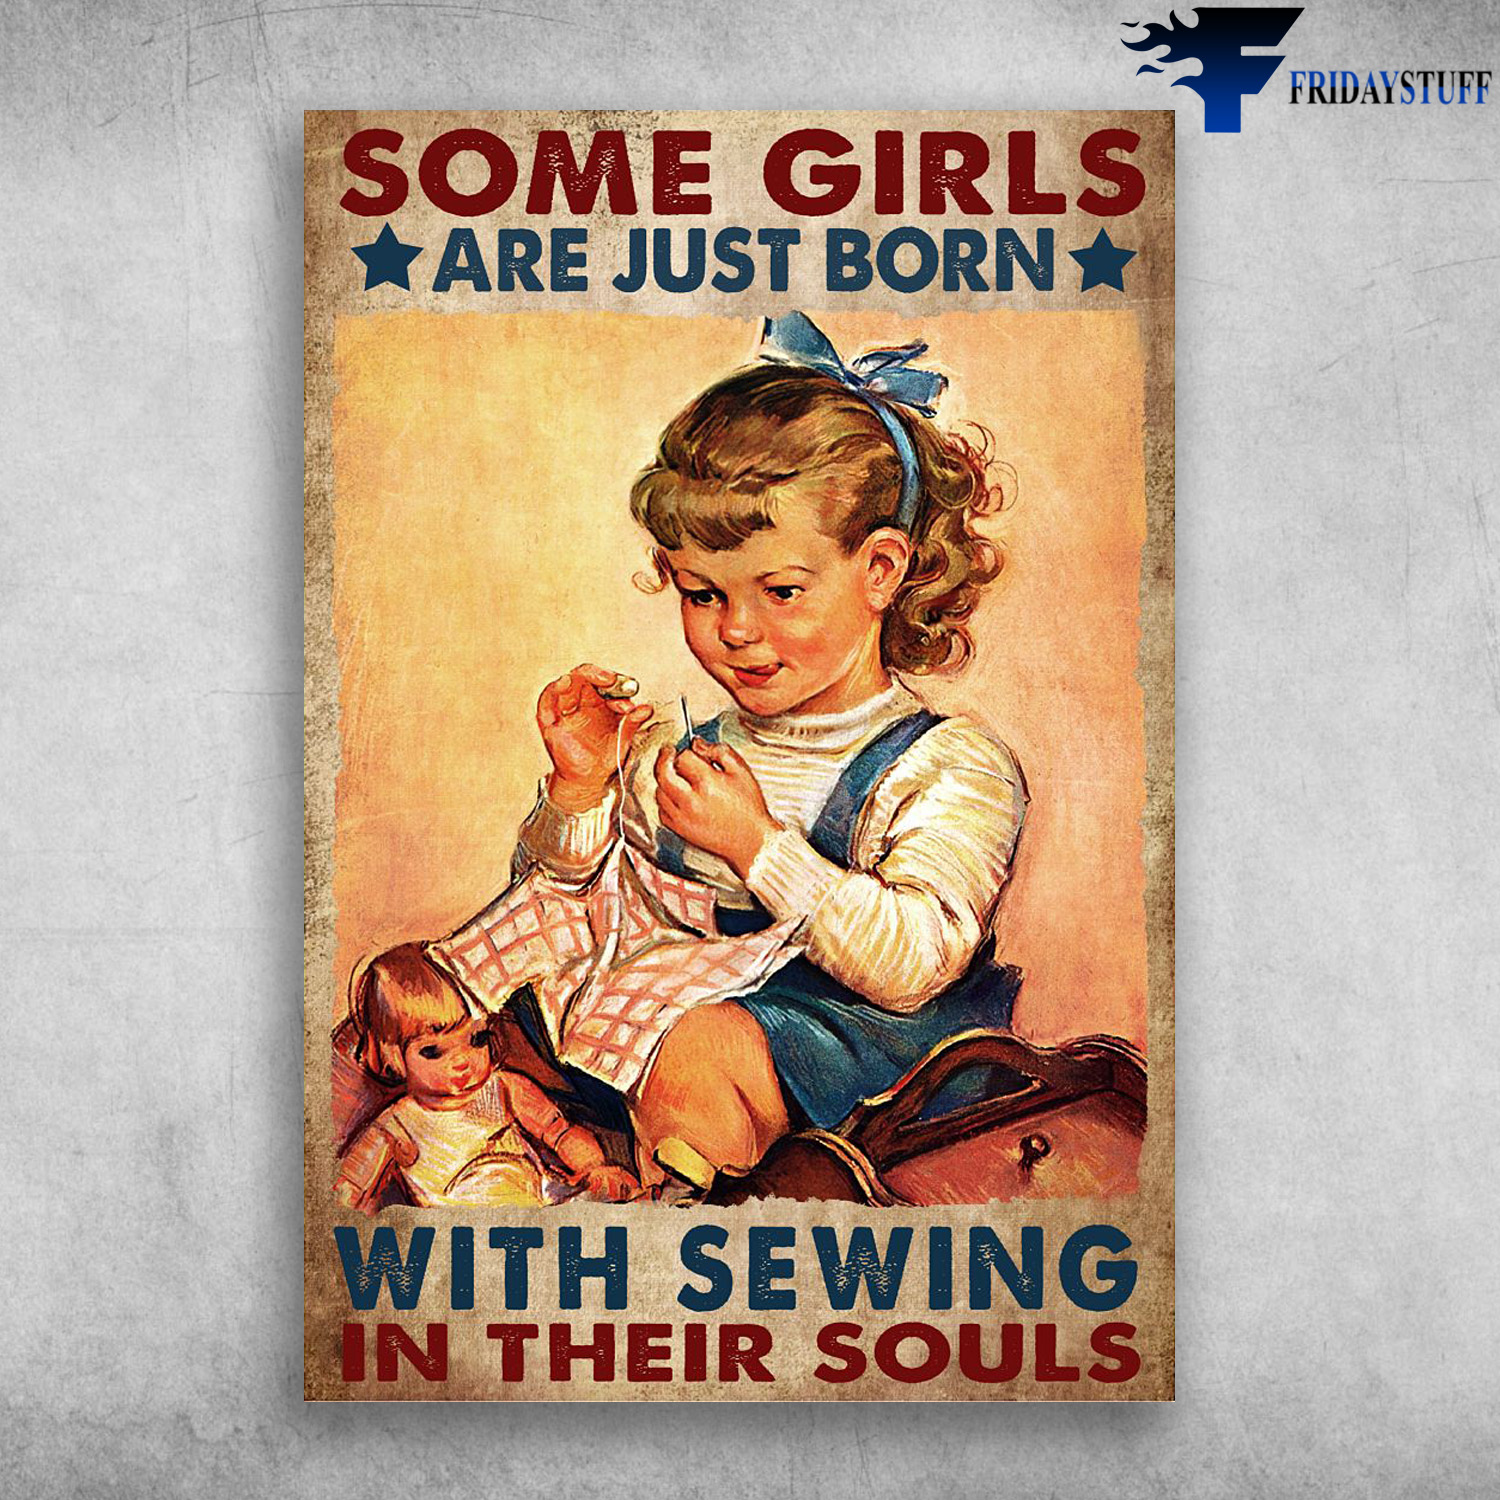 Little Girl Sewing With The Doll - Some Girls Are Just Born With Sewing In Their Souls